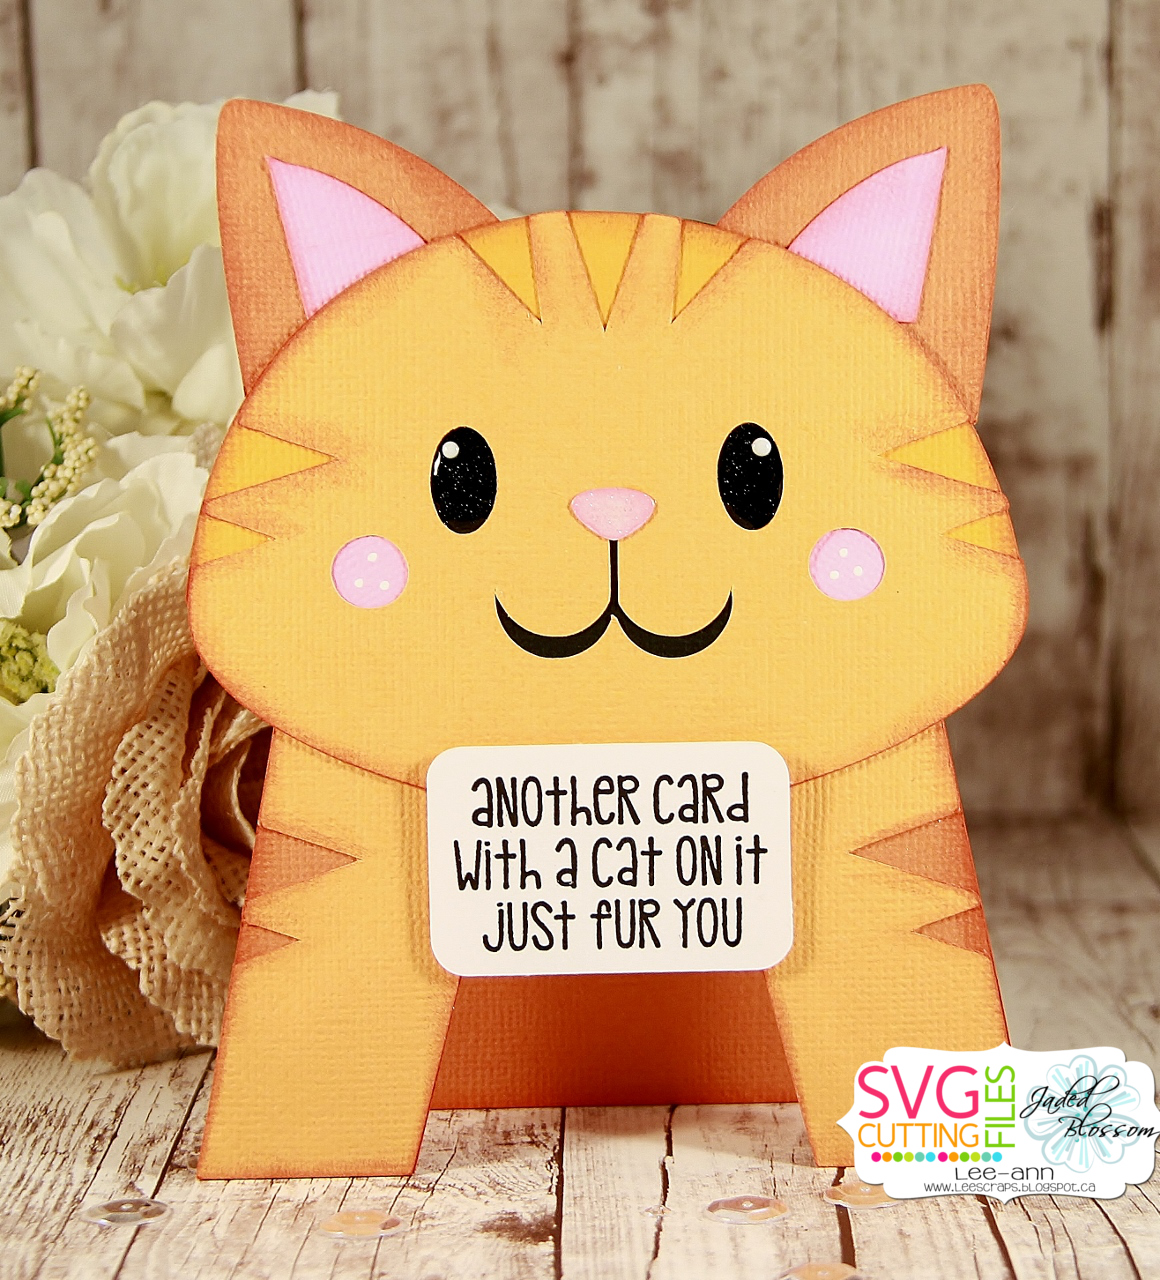 SVG Cutting Files: Cat Letter Standing Card